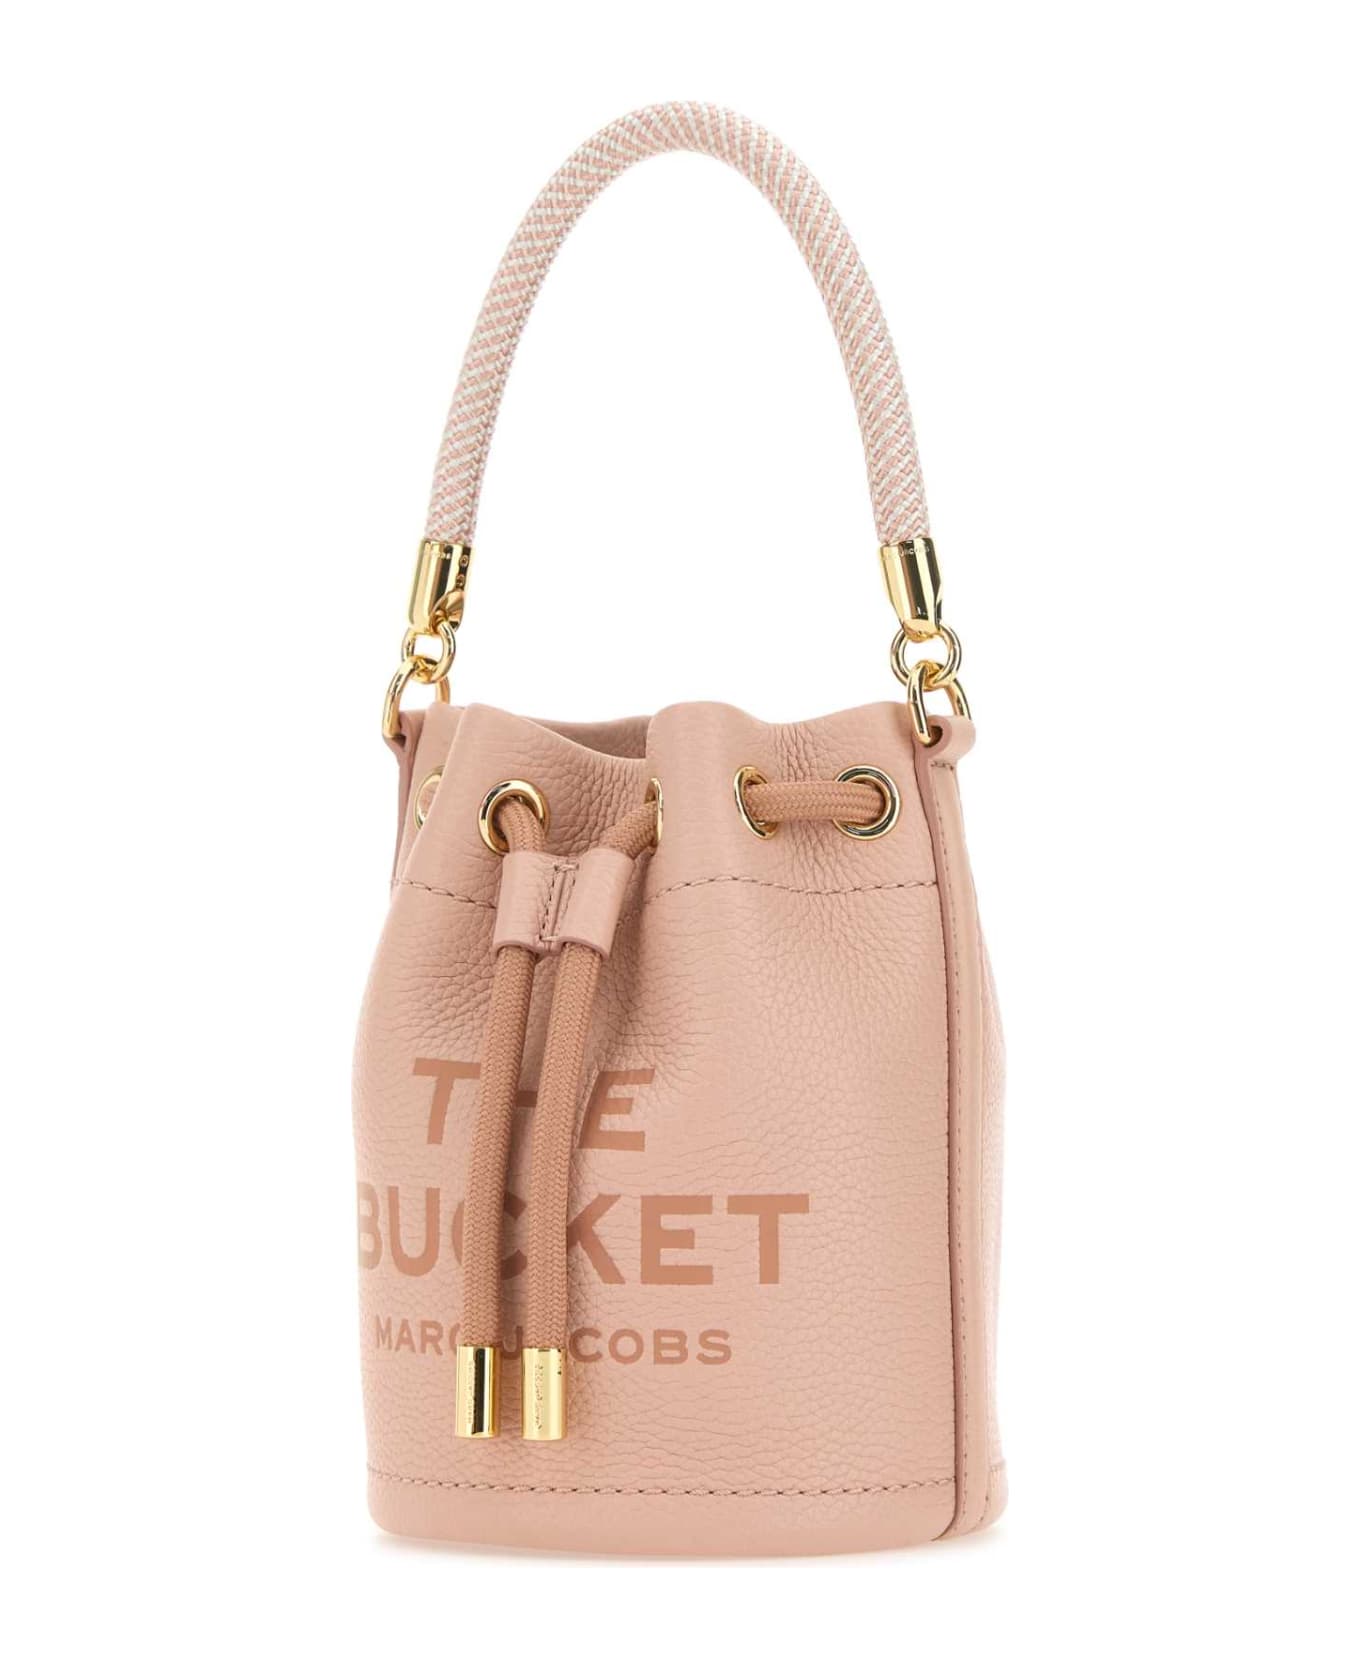 Marc Jacobs Pink Leather Micro The Bucket Bucket Bag - ROSE